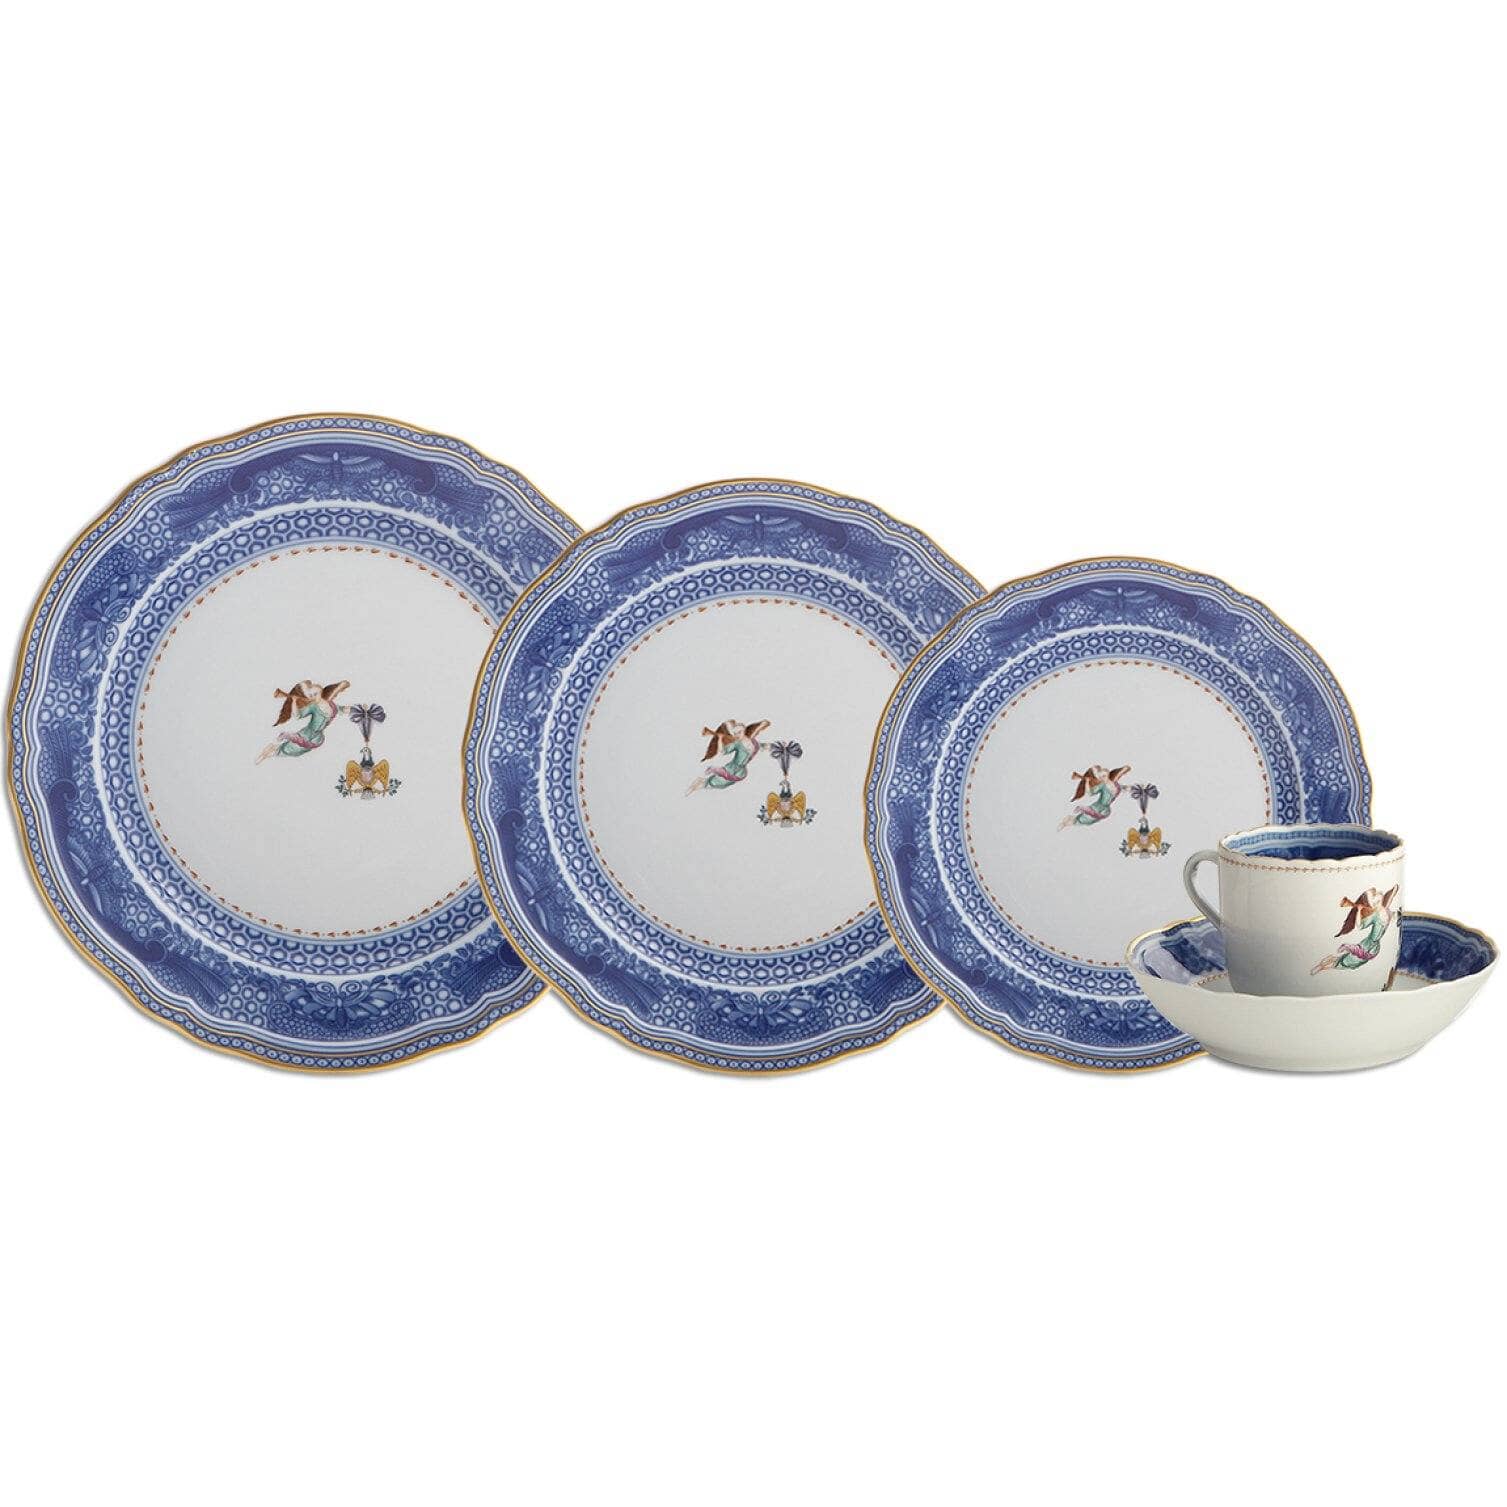 Society of Cincinnati China Collection by Mottahedeh